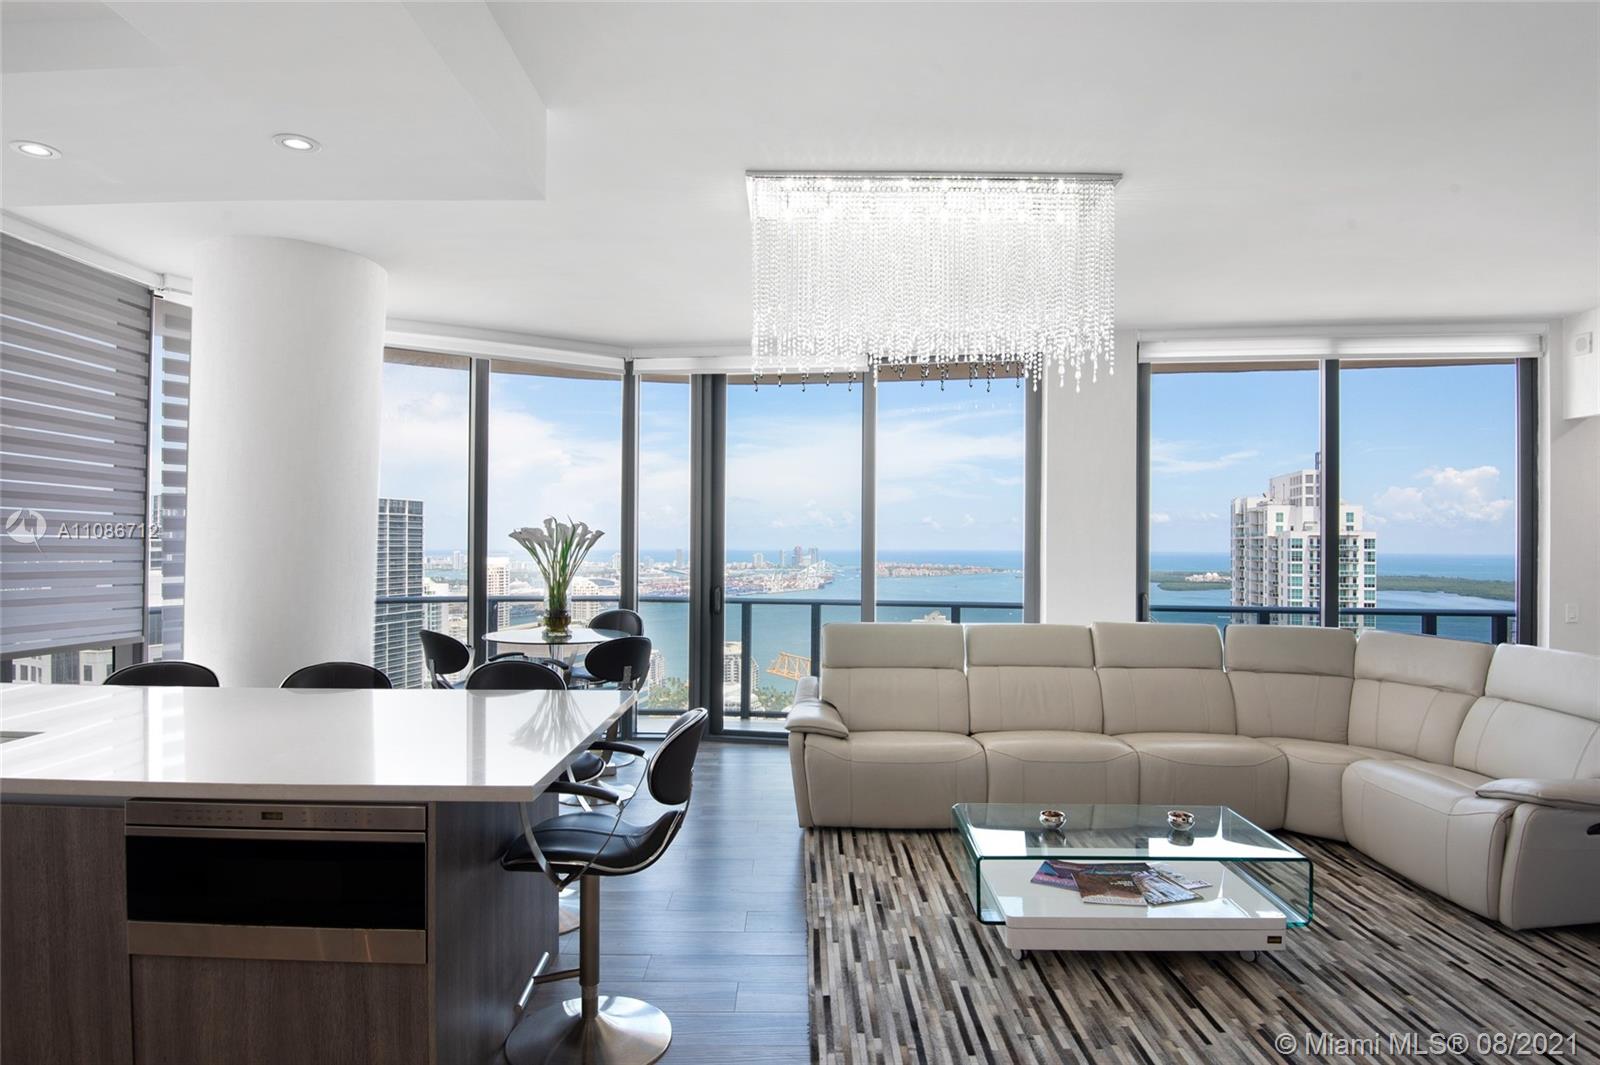 Reduced! Welcome to unit 5205 at exclusive SLS LUX.  This unit is located on one of the top floors in the building, with southeast exposure, you have the most incredible bay and city views throughout the day & night! This corner unit boasts a wrap around balcony with access from all the rooms, floor to ceiling glass windows throughout with electric blinds, 10ft ceilings, upgraded italian kitchen with oversized quartz island, top of the line appliances, private elevator & foyer. Amenities include 24/7 concierge, gym, lounge & pool decks w/ cabana and poolside bar (9th & 57th floors), Tennis & basketball court, game room, 24/7 Valet parking, basic cable & internet.